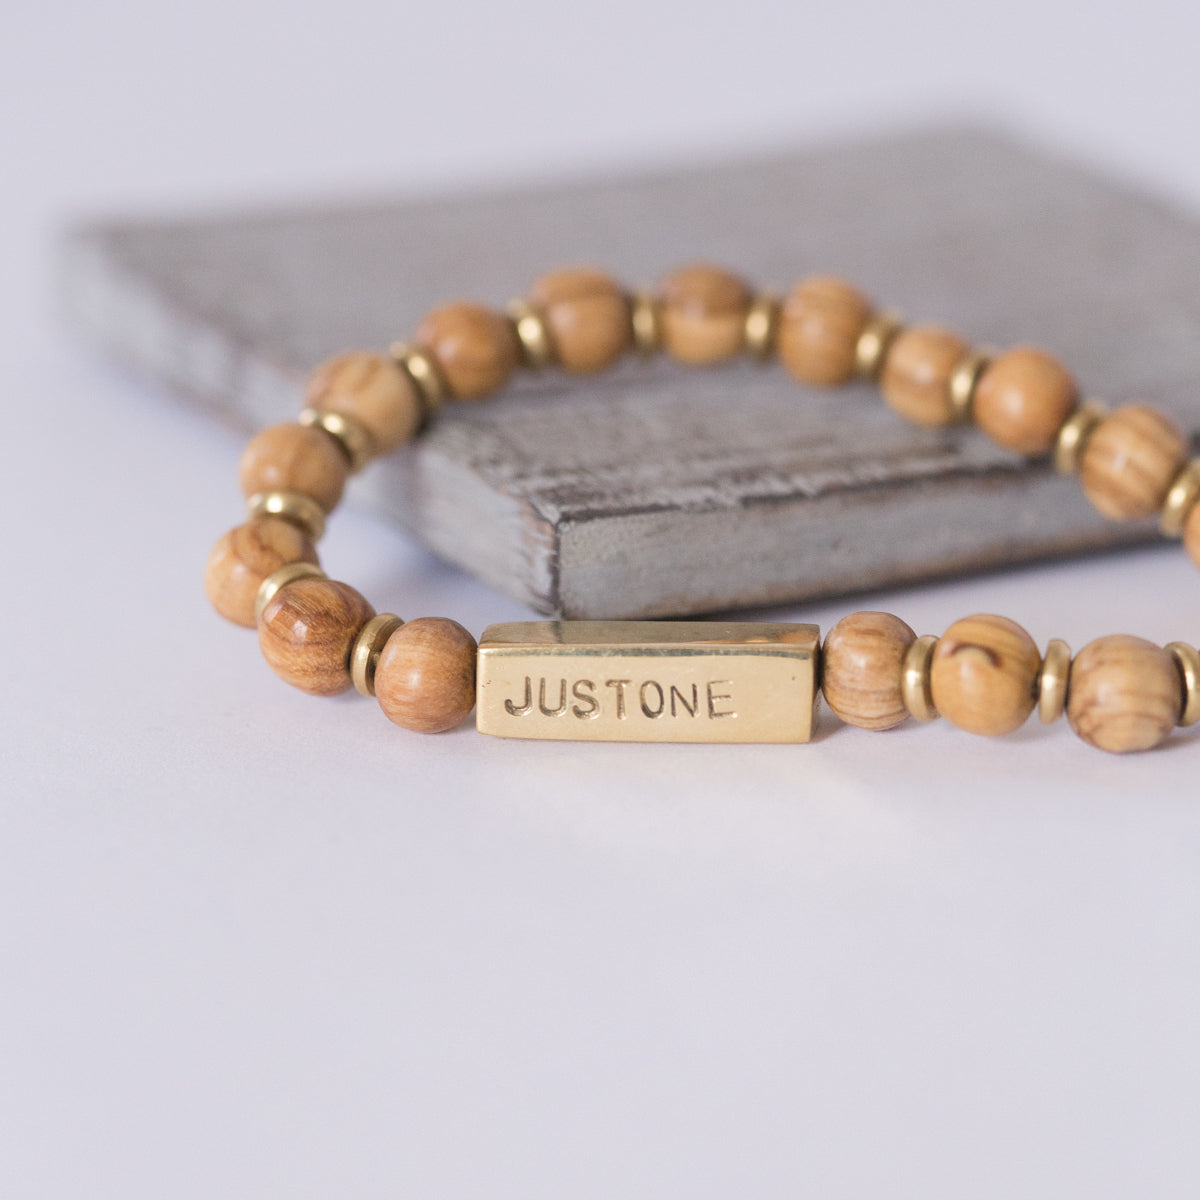 JustOne's stretch bracelet made with handcrafted wooden beads and brass bar that says JustOne, handcrafted in Kenya